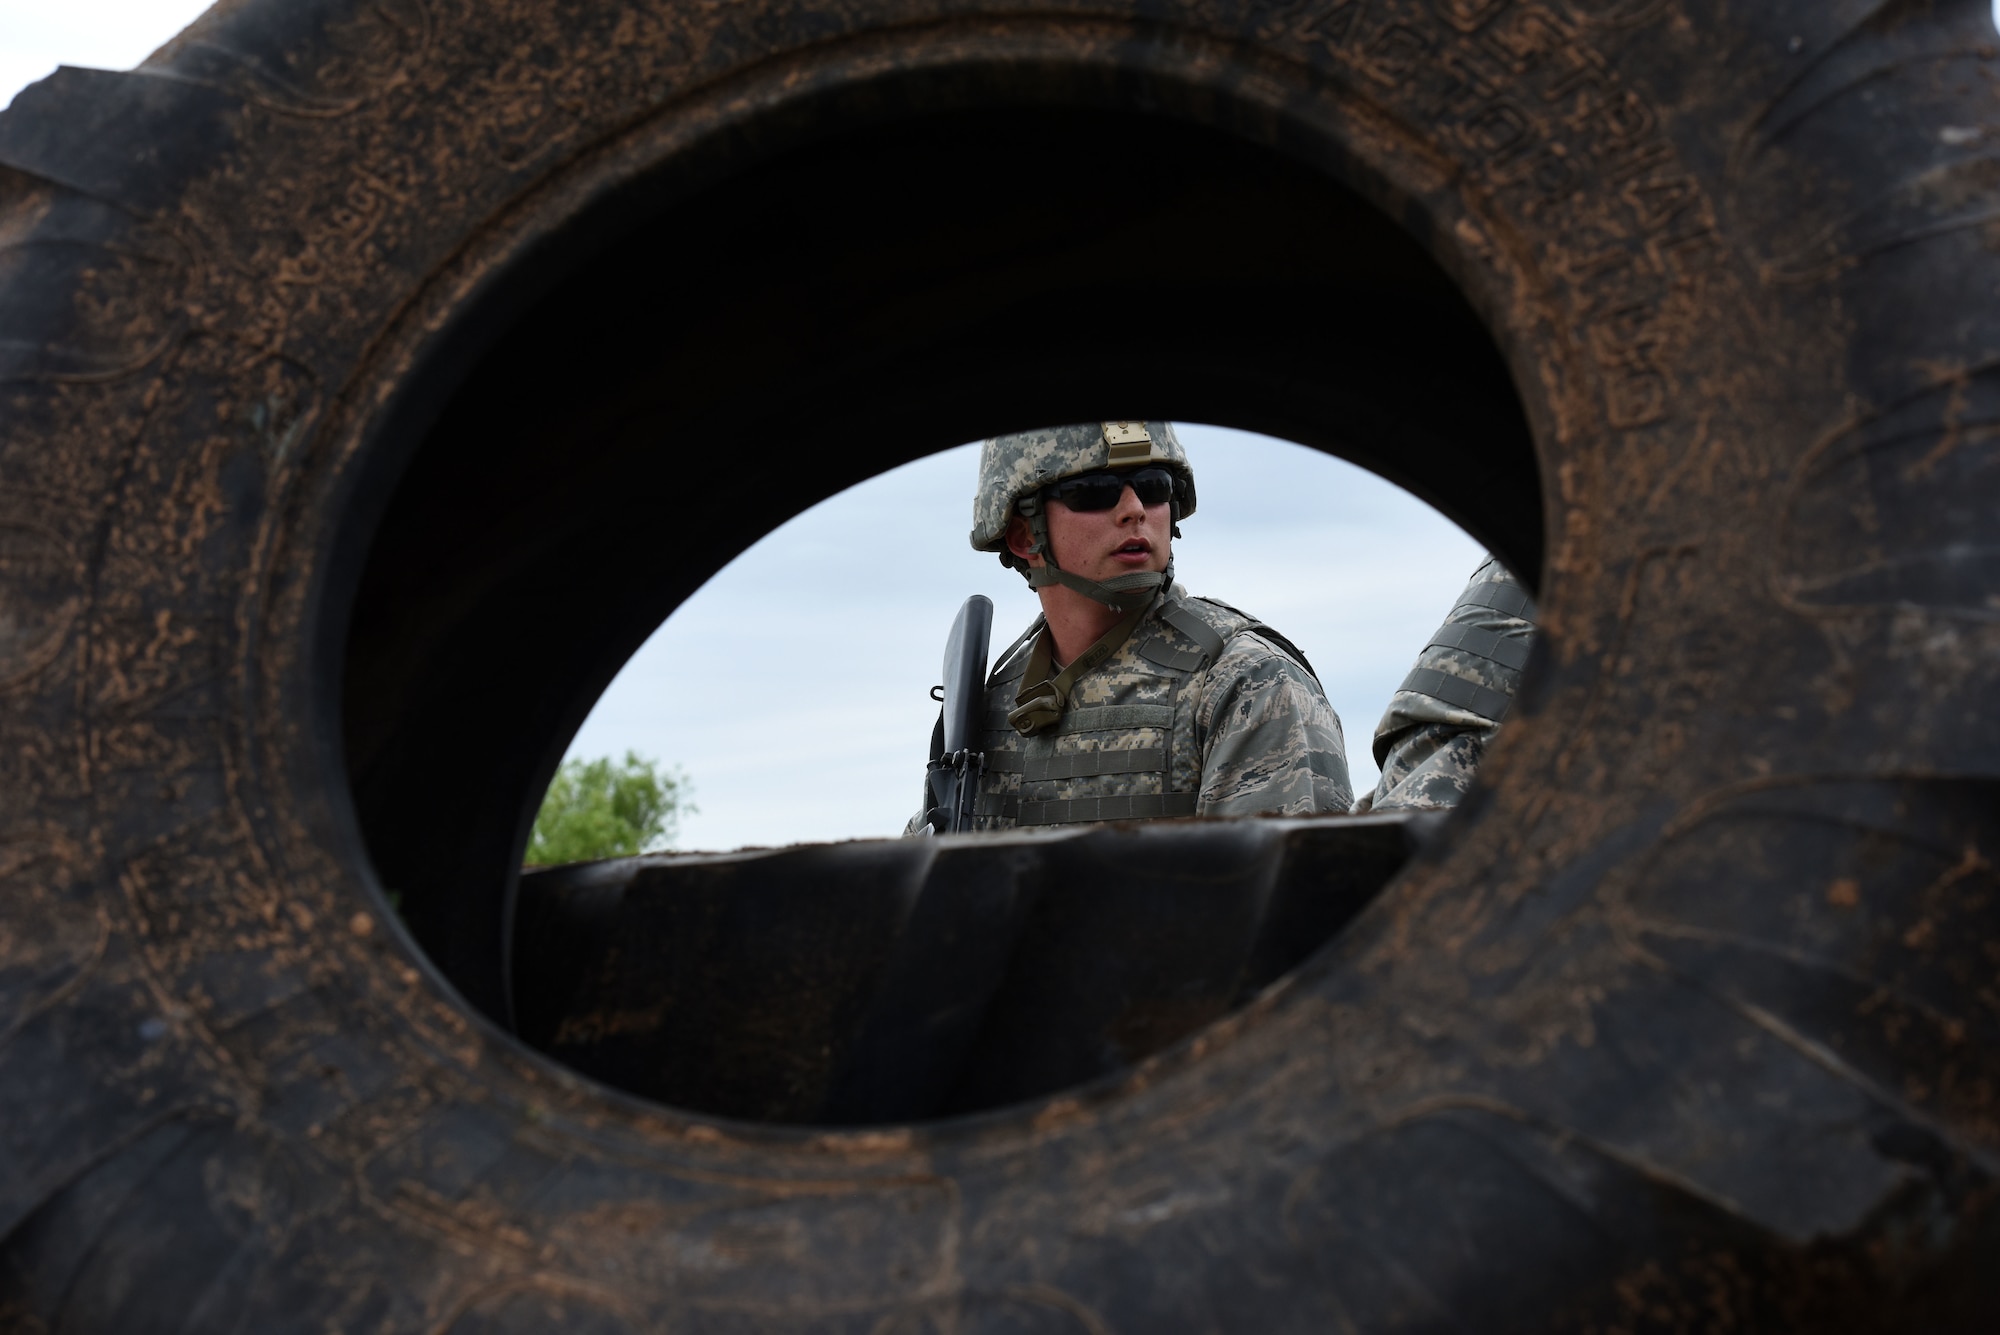 Justin O’Brien, Angelo State University Air Force ROTC cadet, takes cover during one of the exercises at the mock forward operating base on Goodfellow Air Force Base, Texas, April 20, 2018. The training exercise was meant to push cadets to expand their communication and leadership skills they have been taught in the classroom. (U.S. Air Force photo by Airman 1st Class Seraiah Hines/Released)